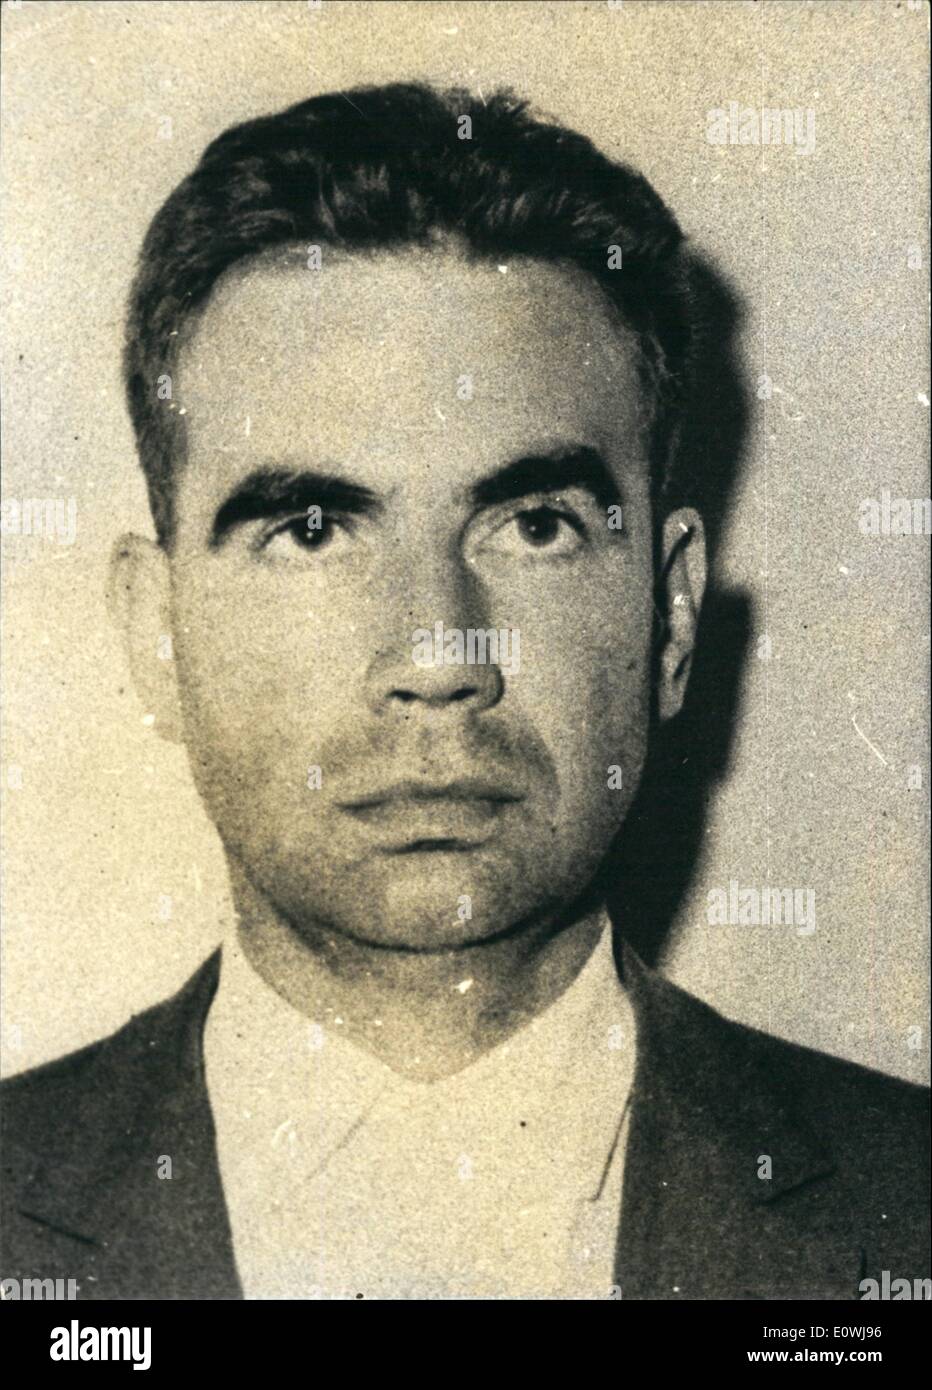 Mar. 03, 1963 - Bastien-Thiry Executed At Dawn... Lieutenant Colonel Bastien-Thiry, leader of the Petit-Clamart conspiration, and sentenced to death by the Military Court, has been executed at dawn. The two other conspirators, Bougrenet de la Tocnaye and Prevost reprieved by the President of the Republic. Ops: Portrait of Lt.-Col. Bastien-Thiry. Stock Photo